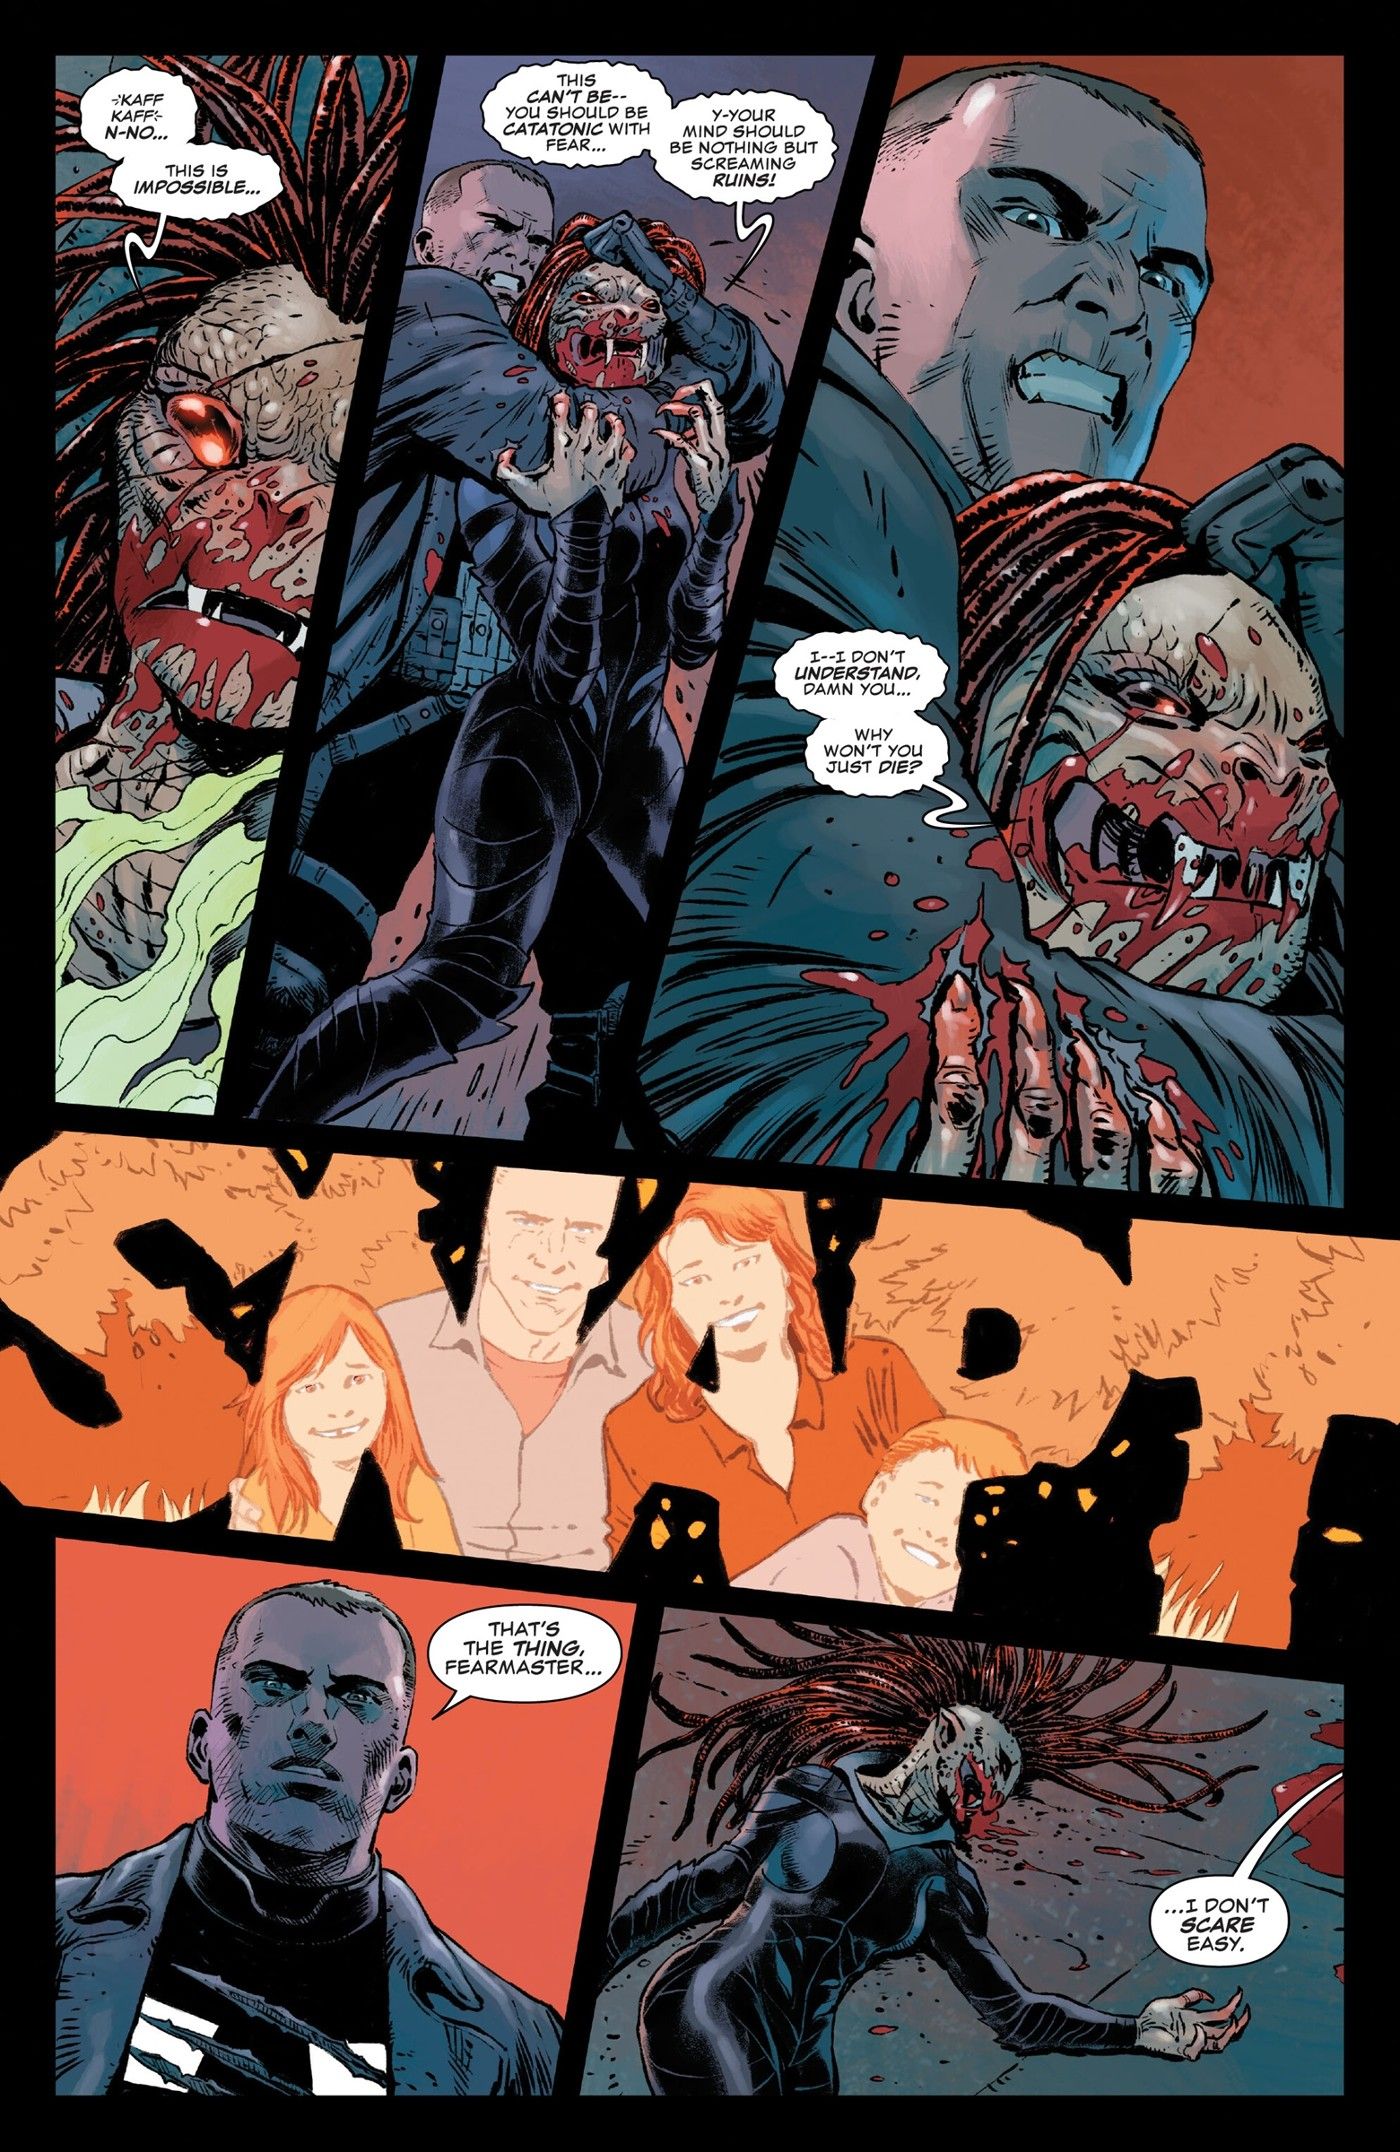 Six panels of the new Punisher fighting FearMaster and ultimately snapping her neck and killing her.